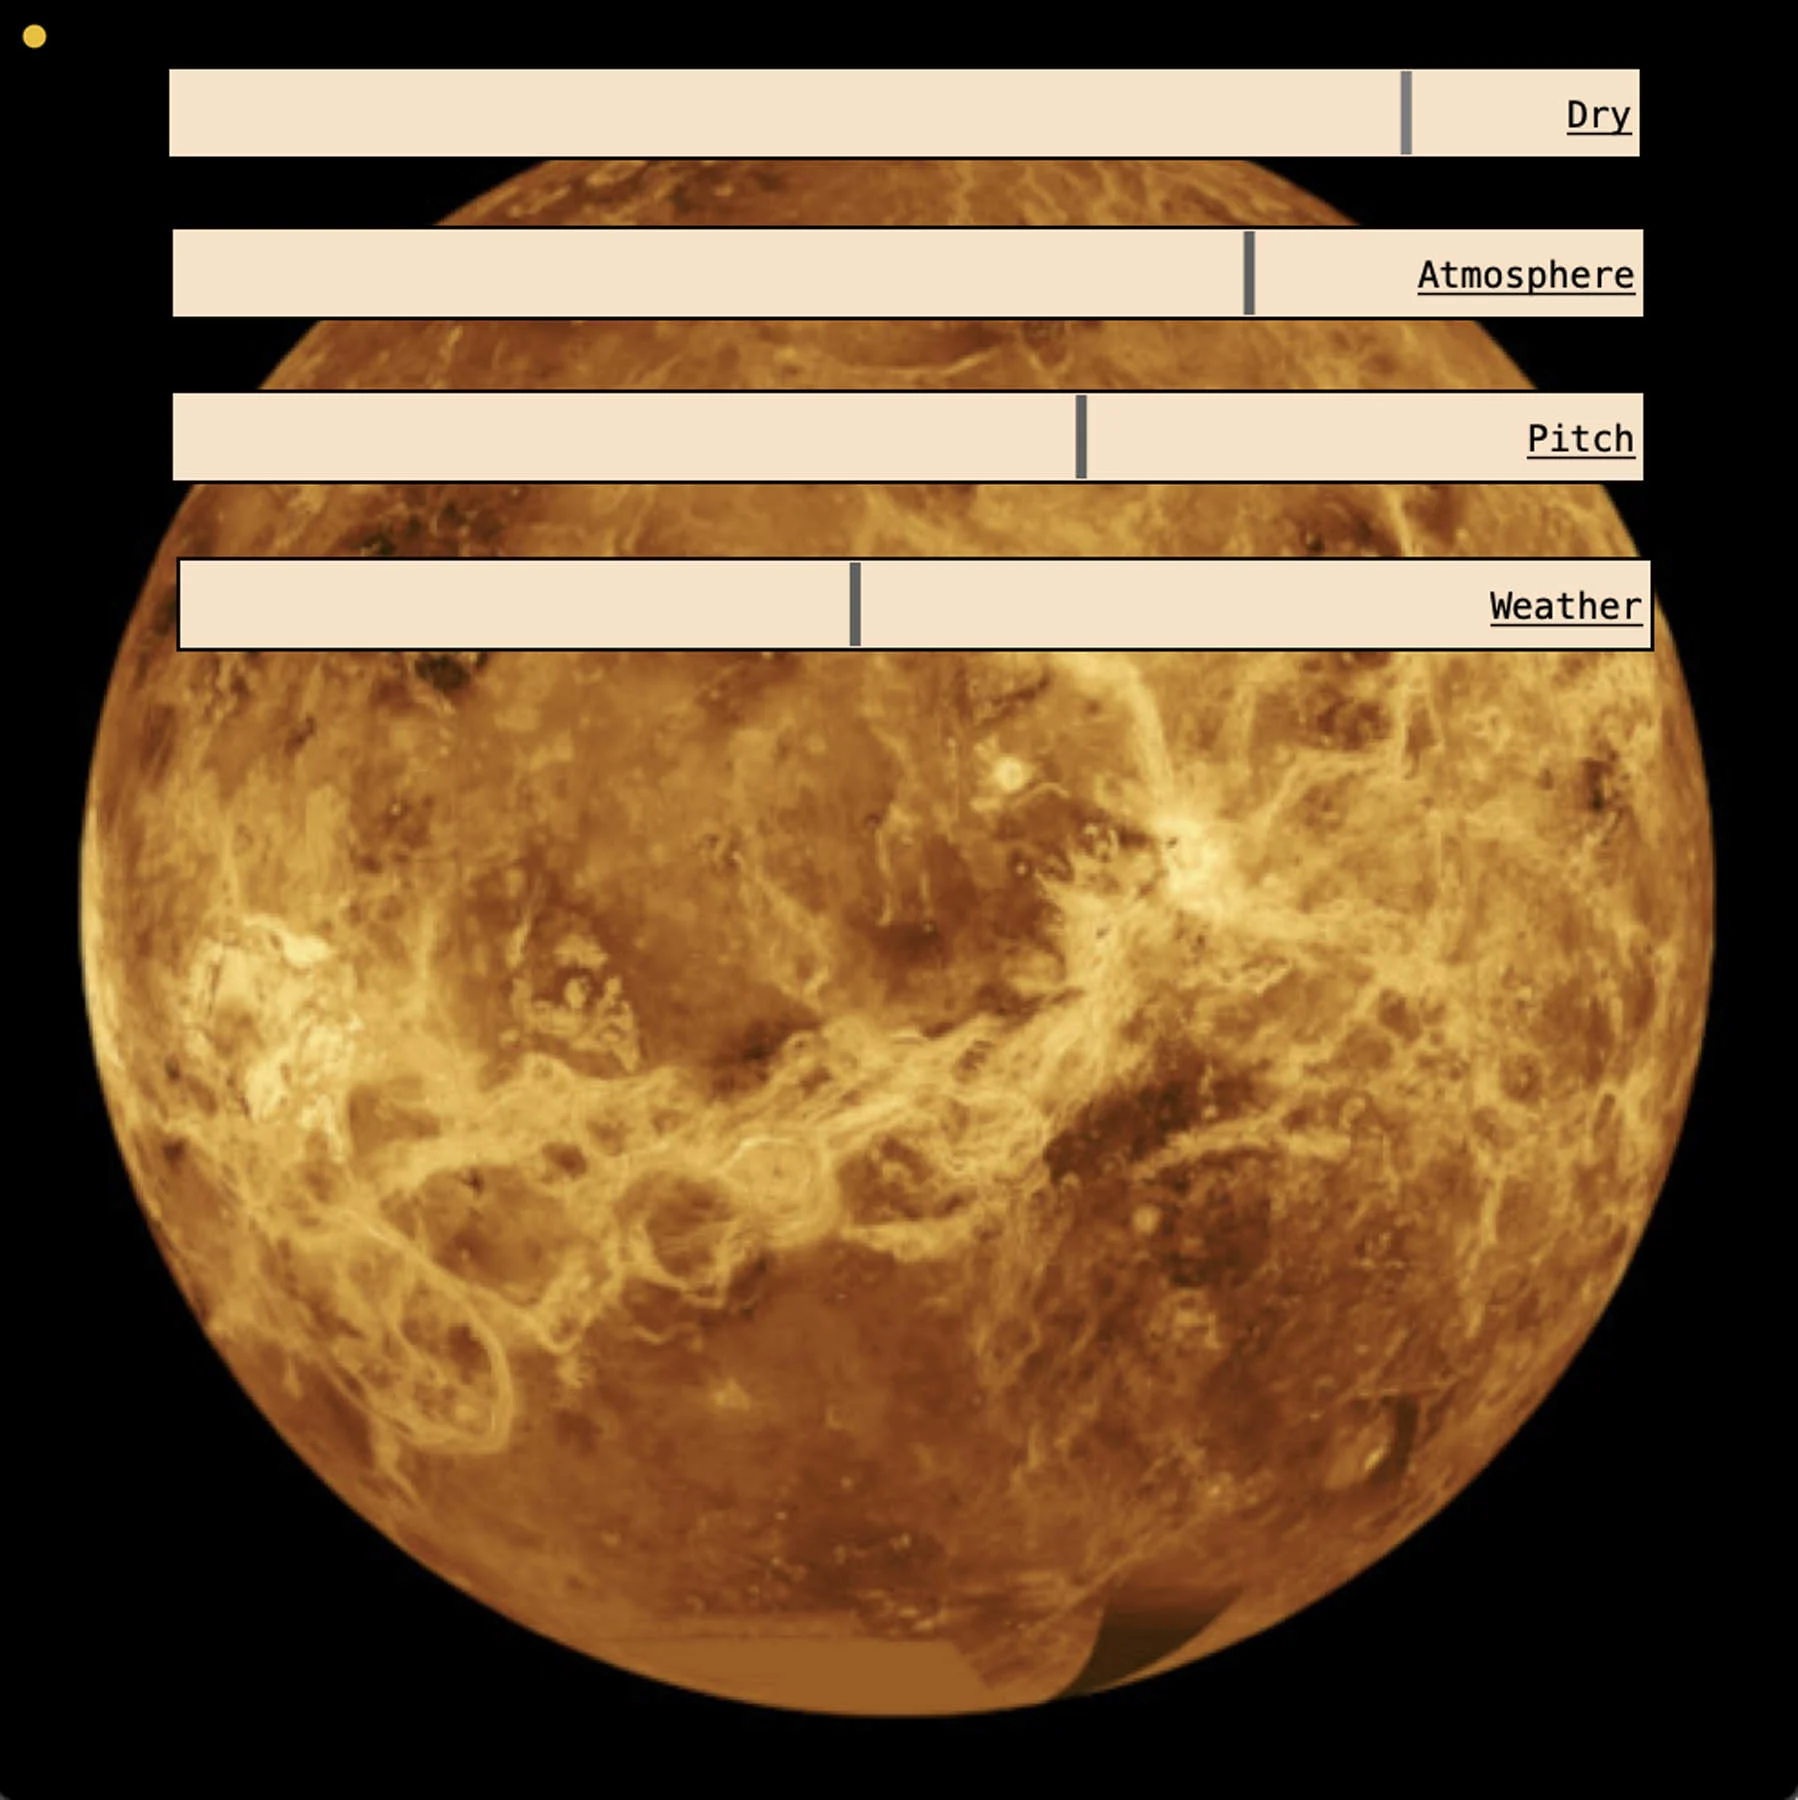 A screenshot of the Venus VST plug-in. The plug-in is made up of a photo of Venus. There are four long peach rectangles overlaid in the top third of the photograph, with a word in each one: Dry, Atmosphere, Pitch, Weather.